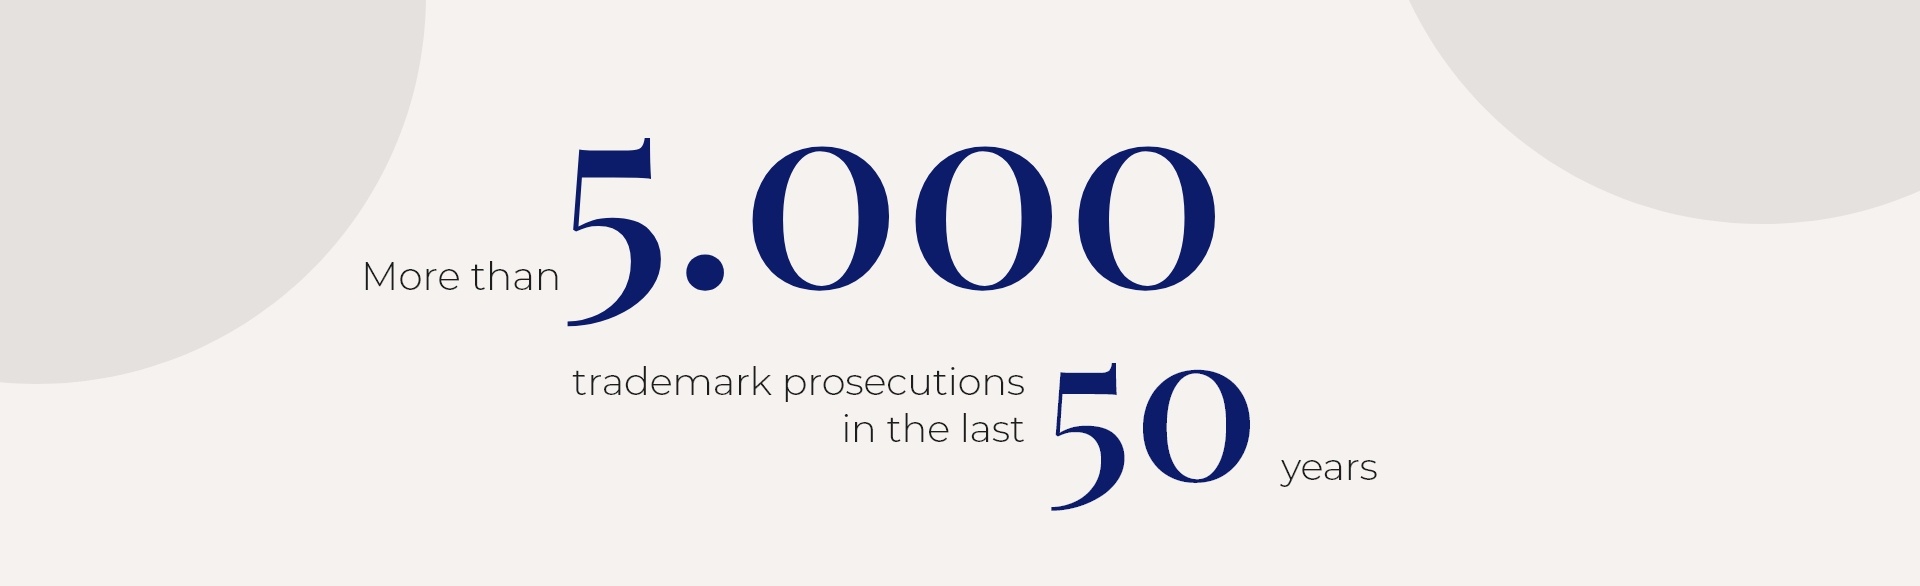 more than 5000 trademark prosecutions in the last 50 years